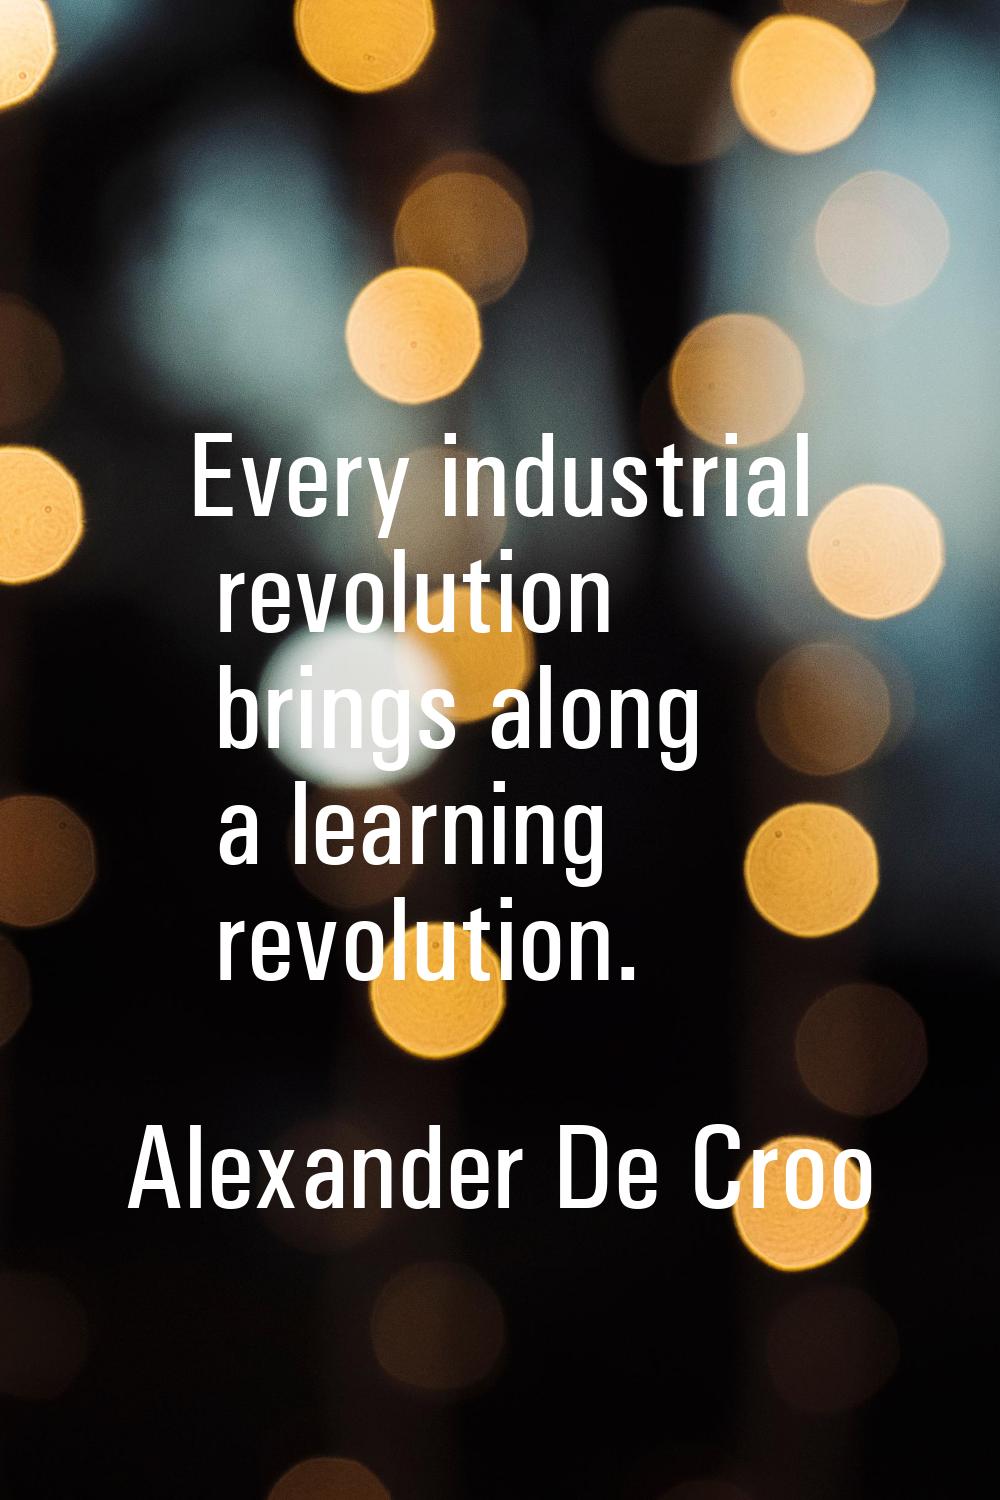 Every industrial revolution brings along a learning revolution.